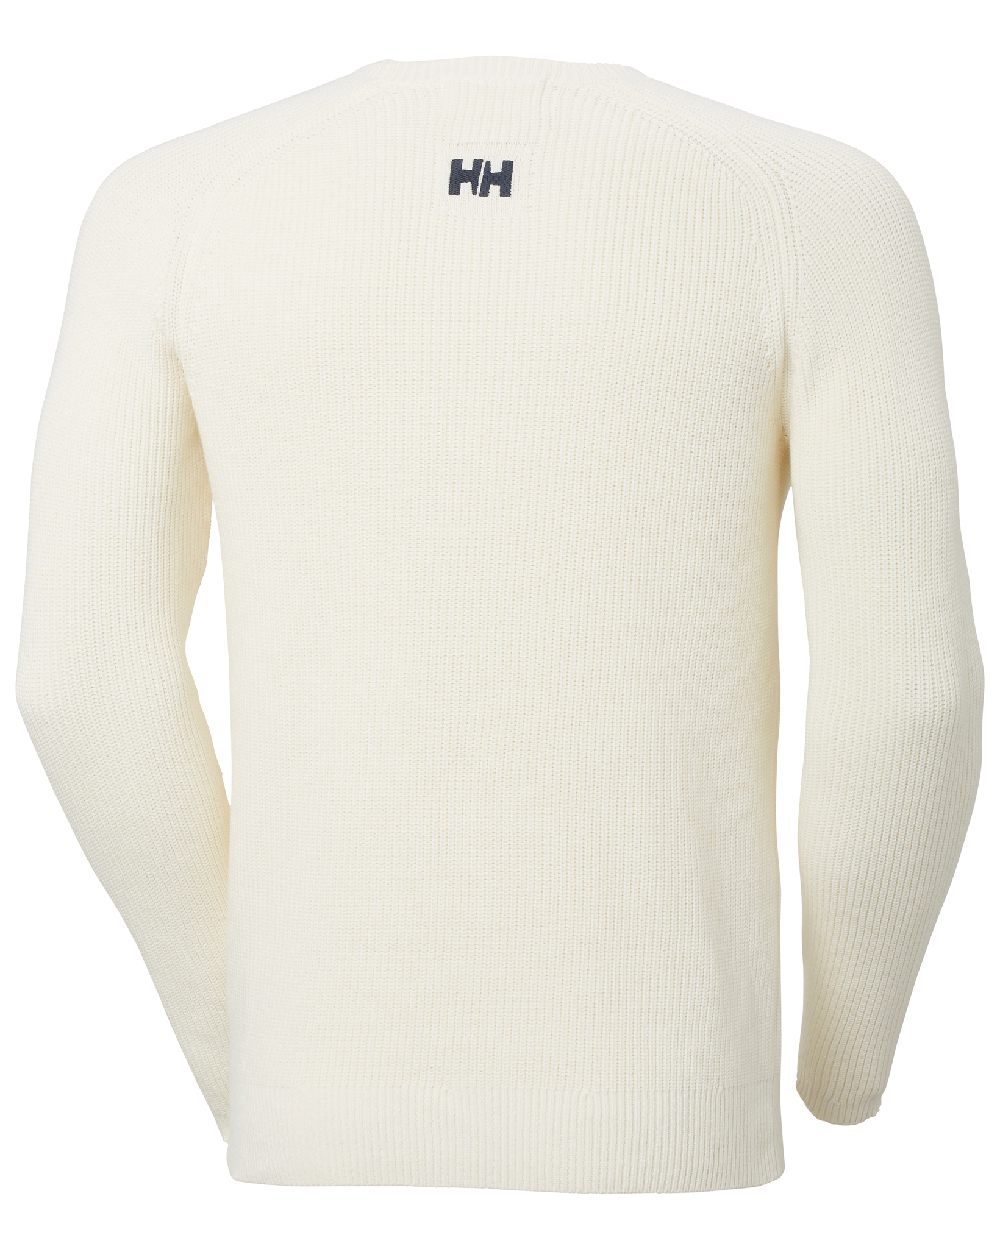 Snow coloured Helly Hansen Mens Dock Ribknit Sweater on white background 